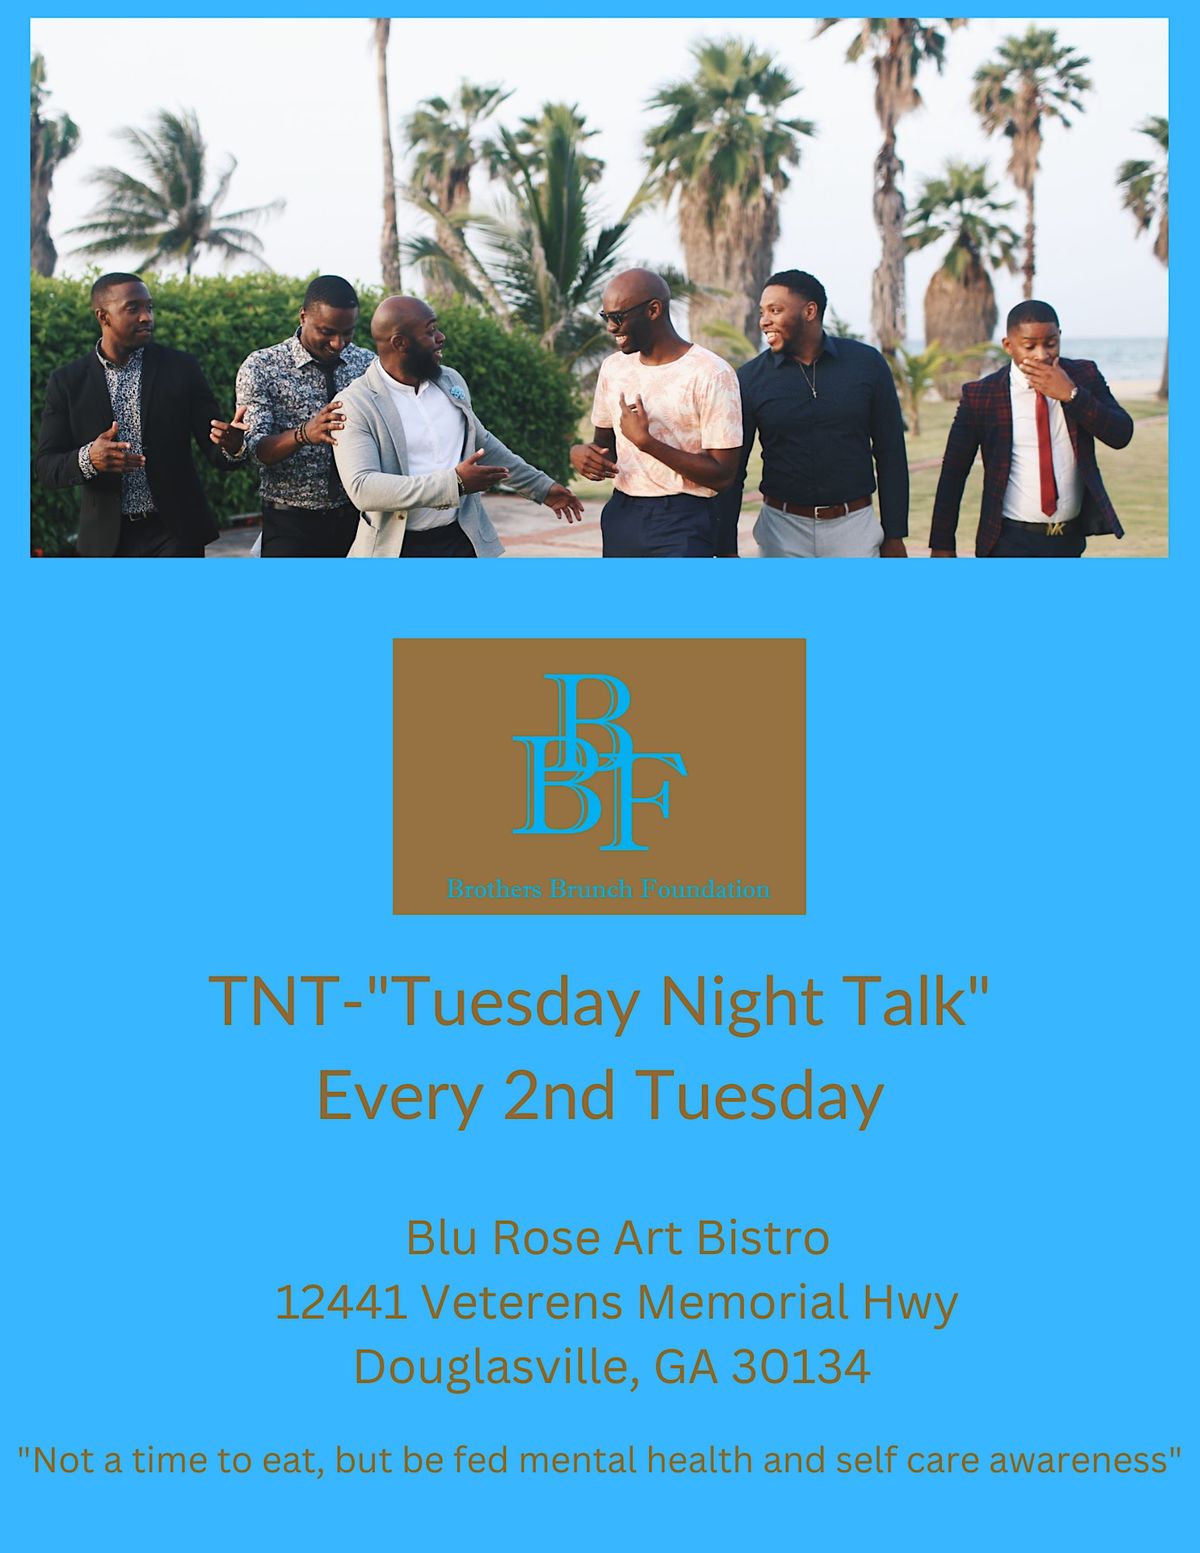 Brothers Brunch Foundation Presents Tuesday Night Talks